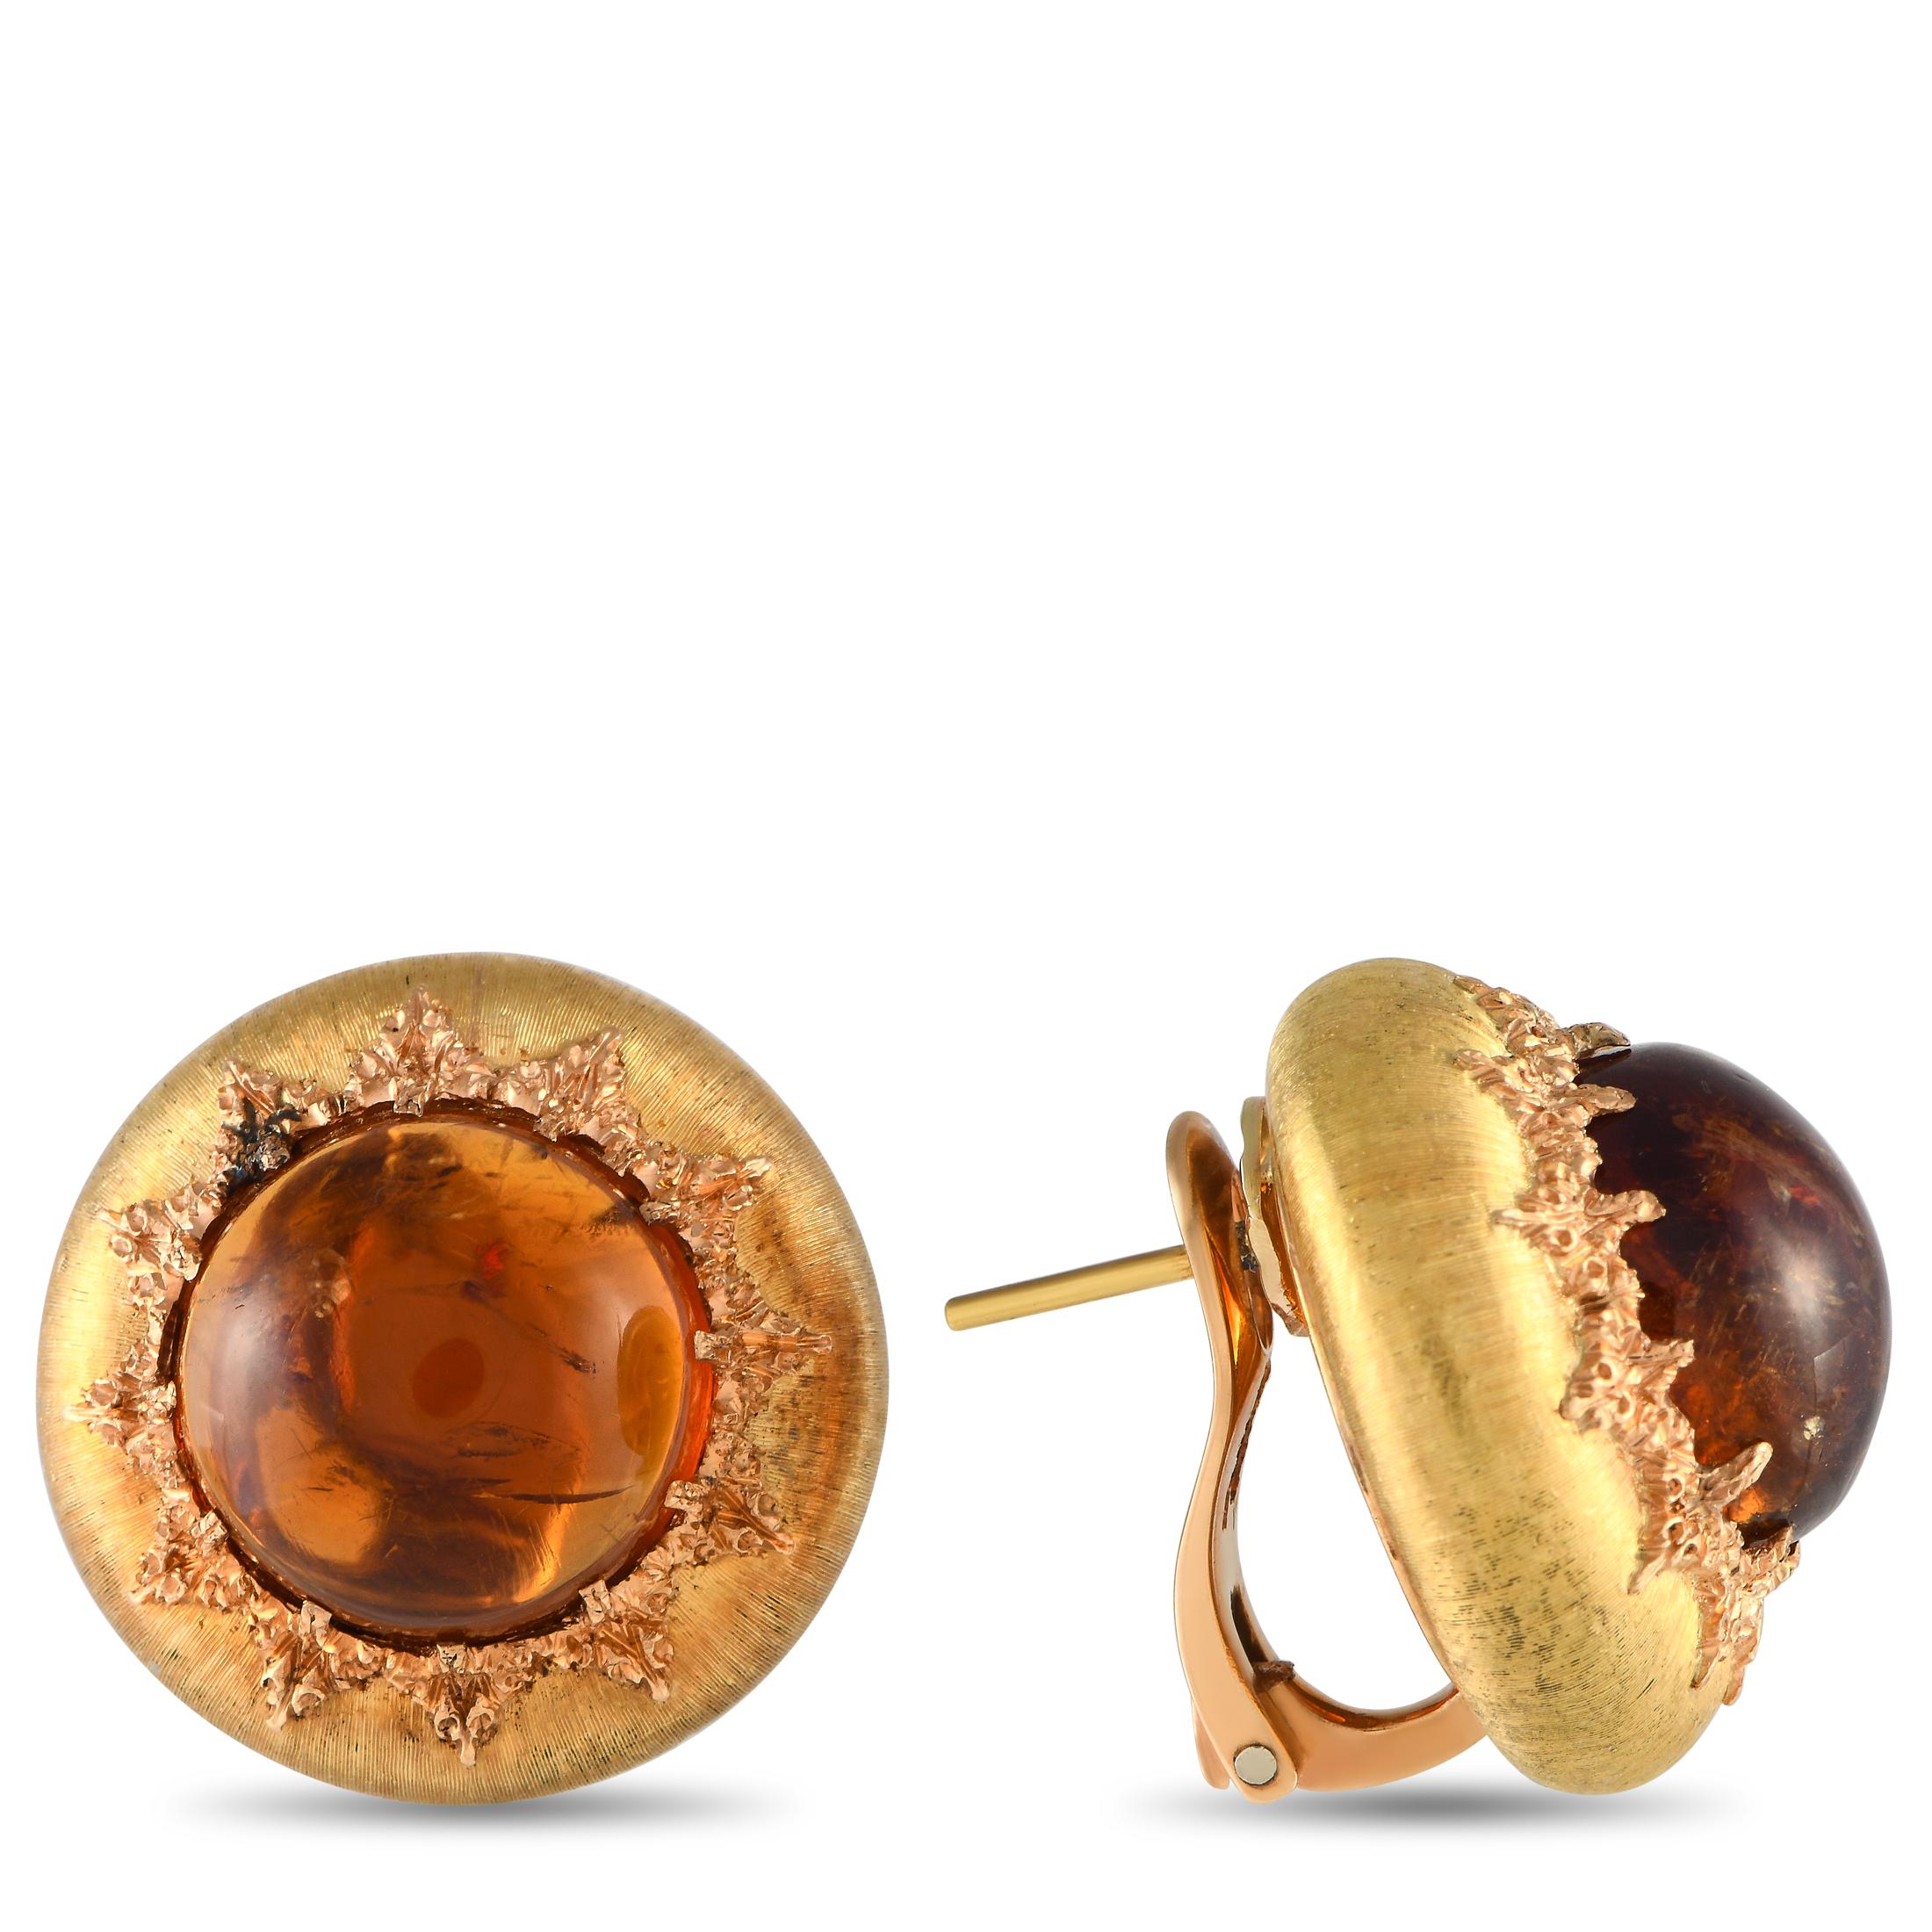 Give your outfits a gorgeous amber glow by incorporating this pair of Buccellati earrings. Each earring features a rich and vibrant amber stone nestled within a round and textured yellow gold frame. Handmade engraving in leaf motif surrounds the